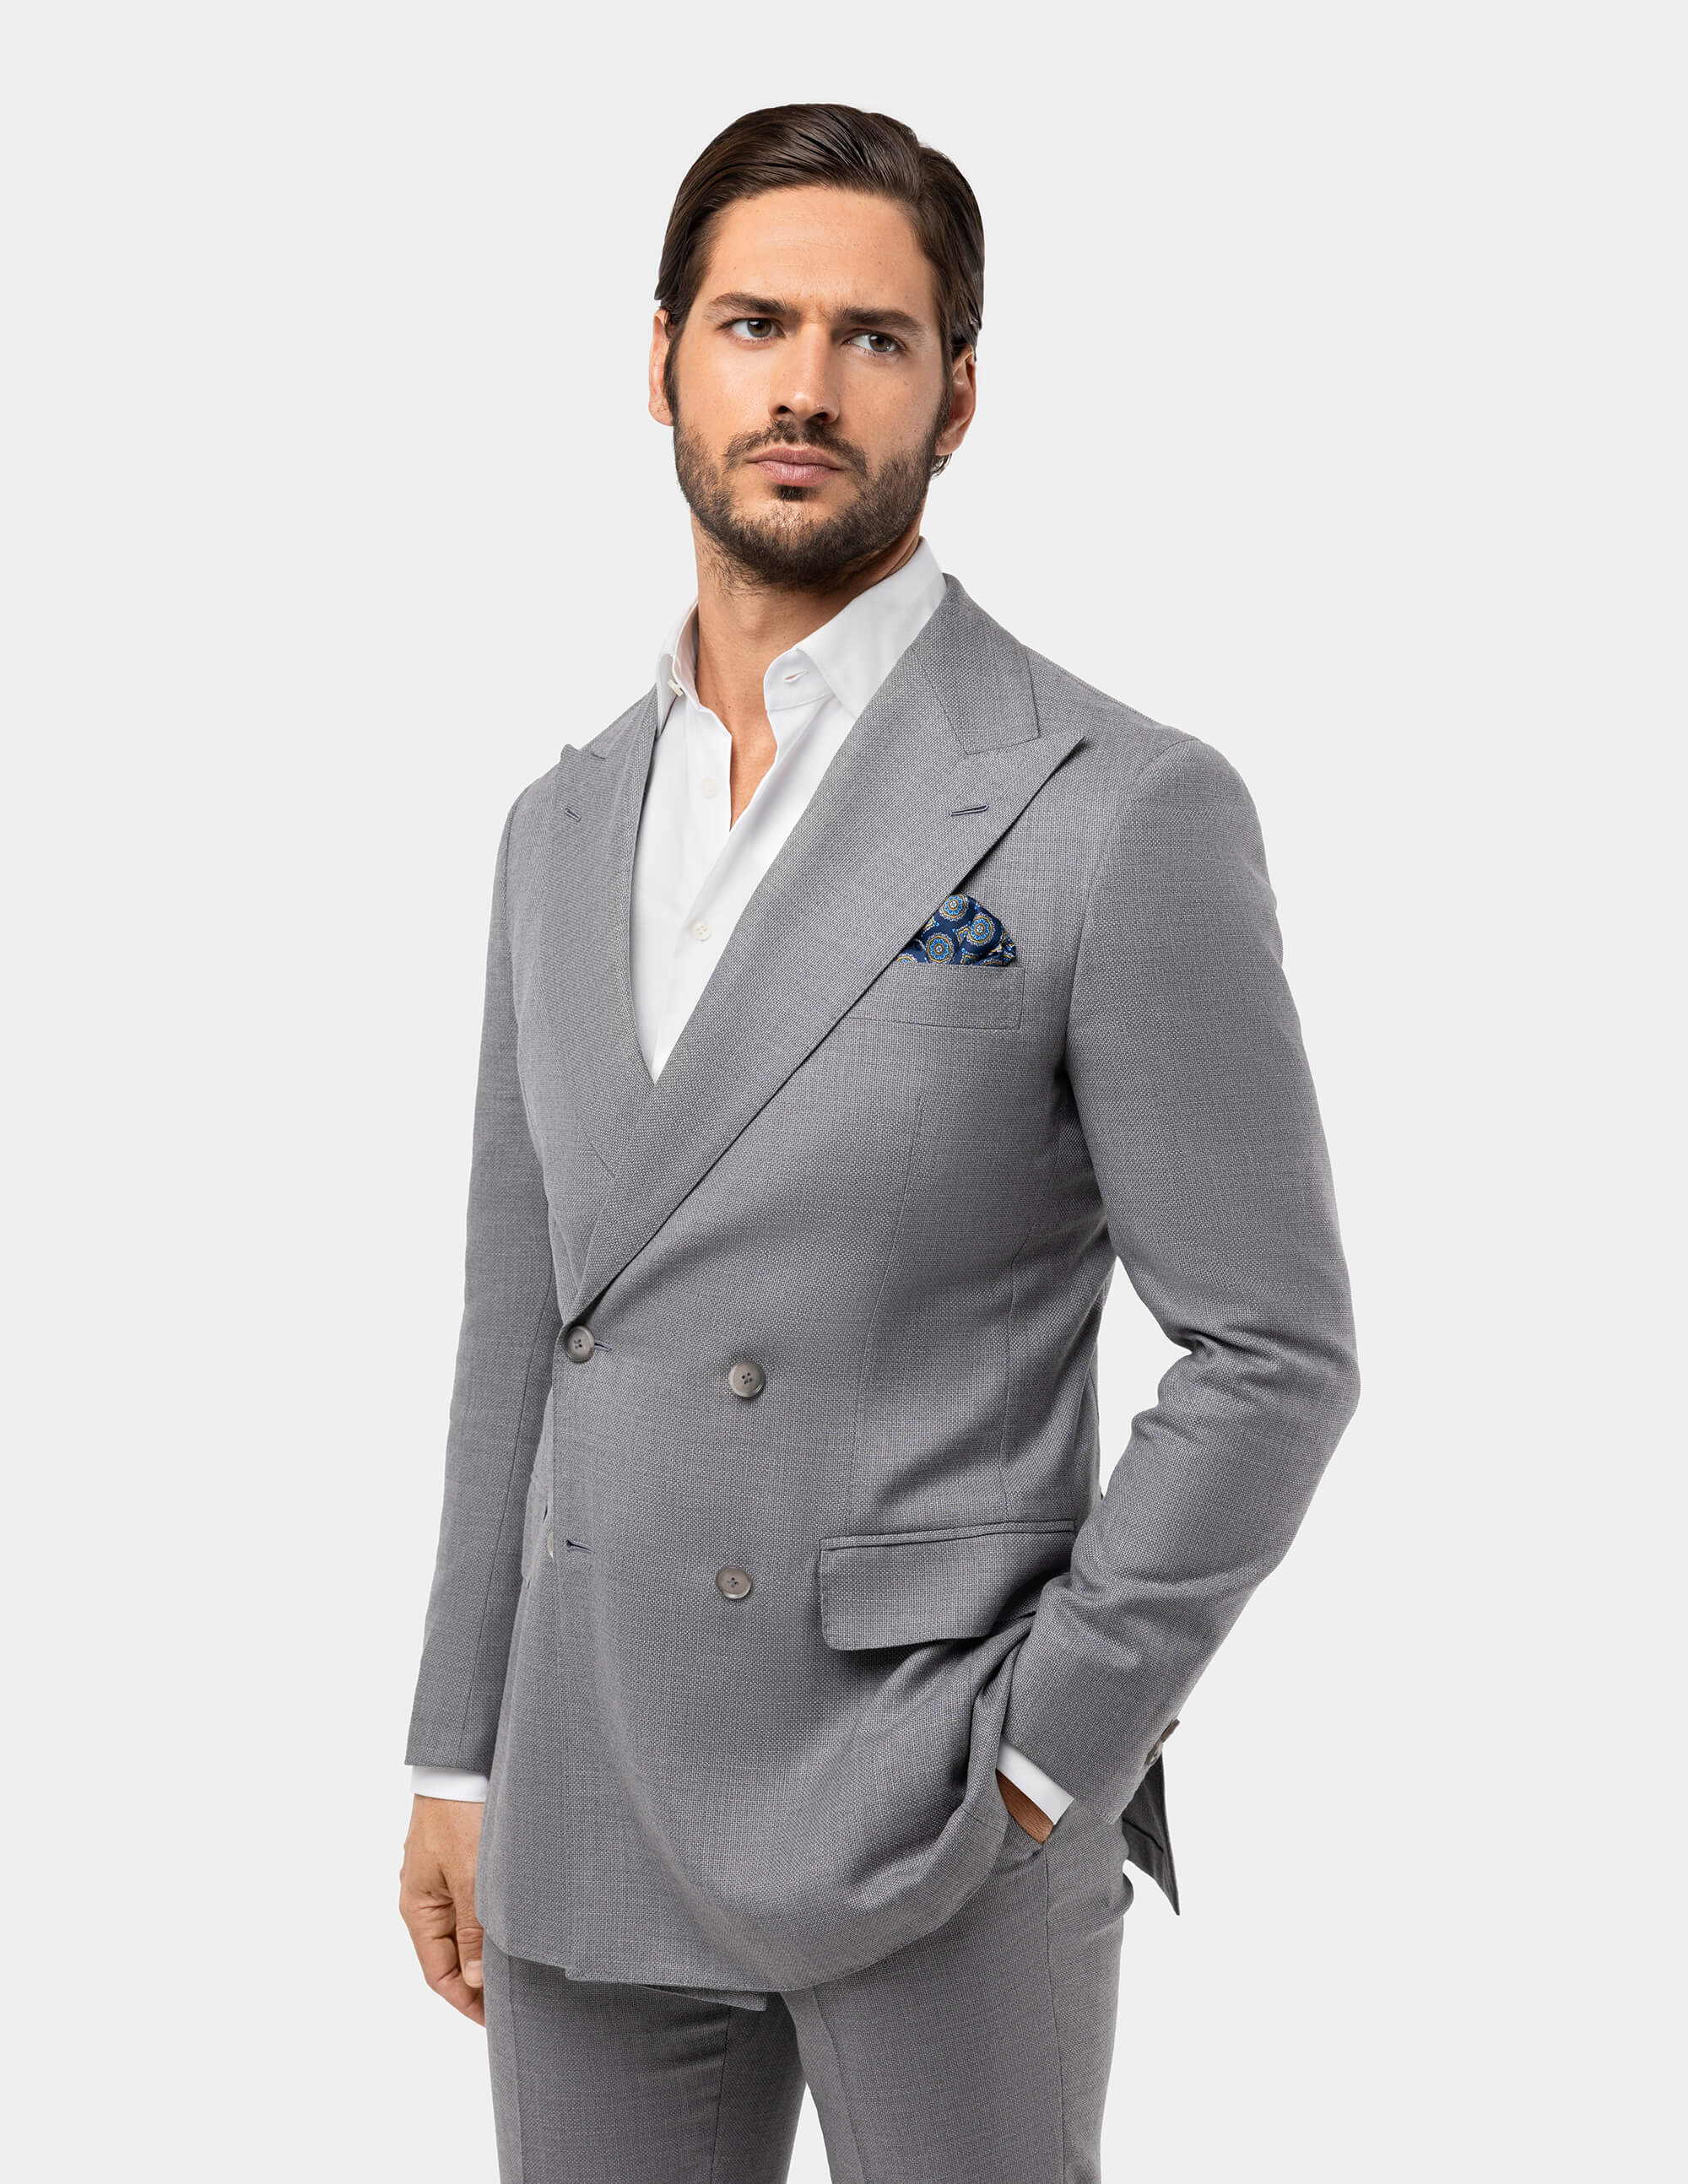 Grey Double Breasted Suit - Samir Bachkami